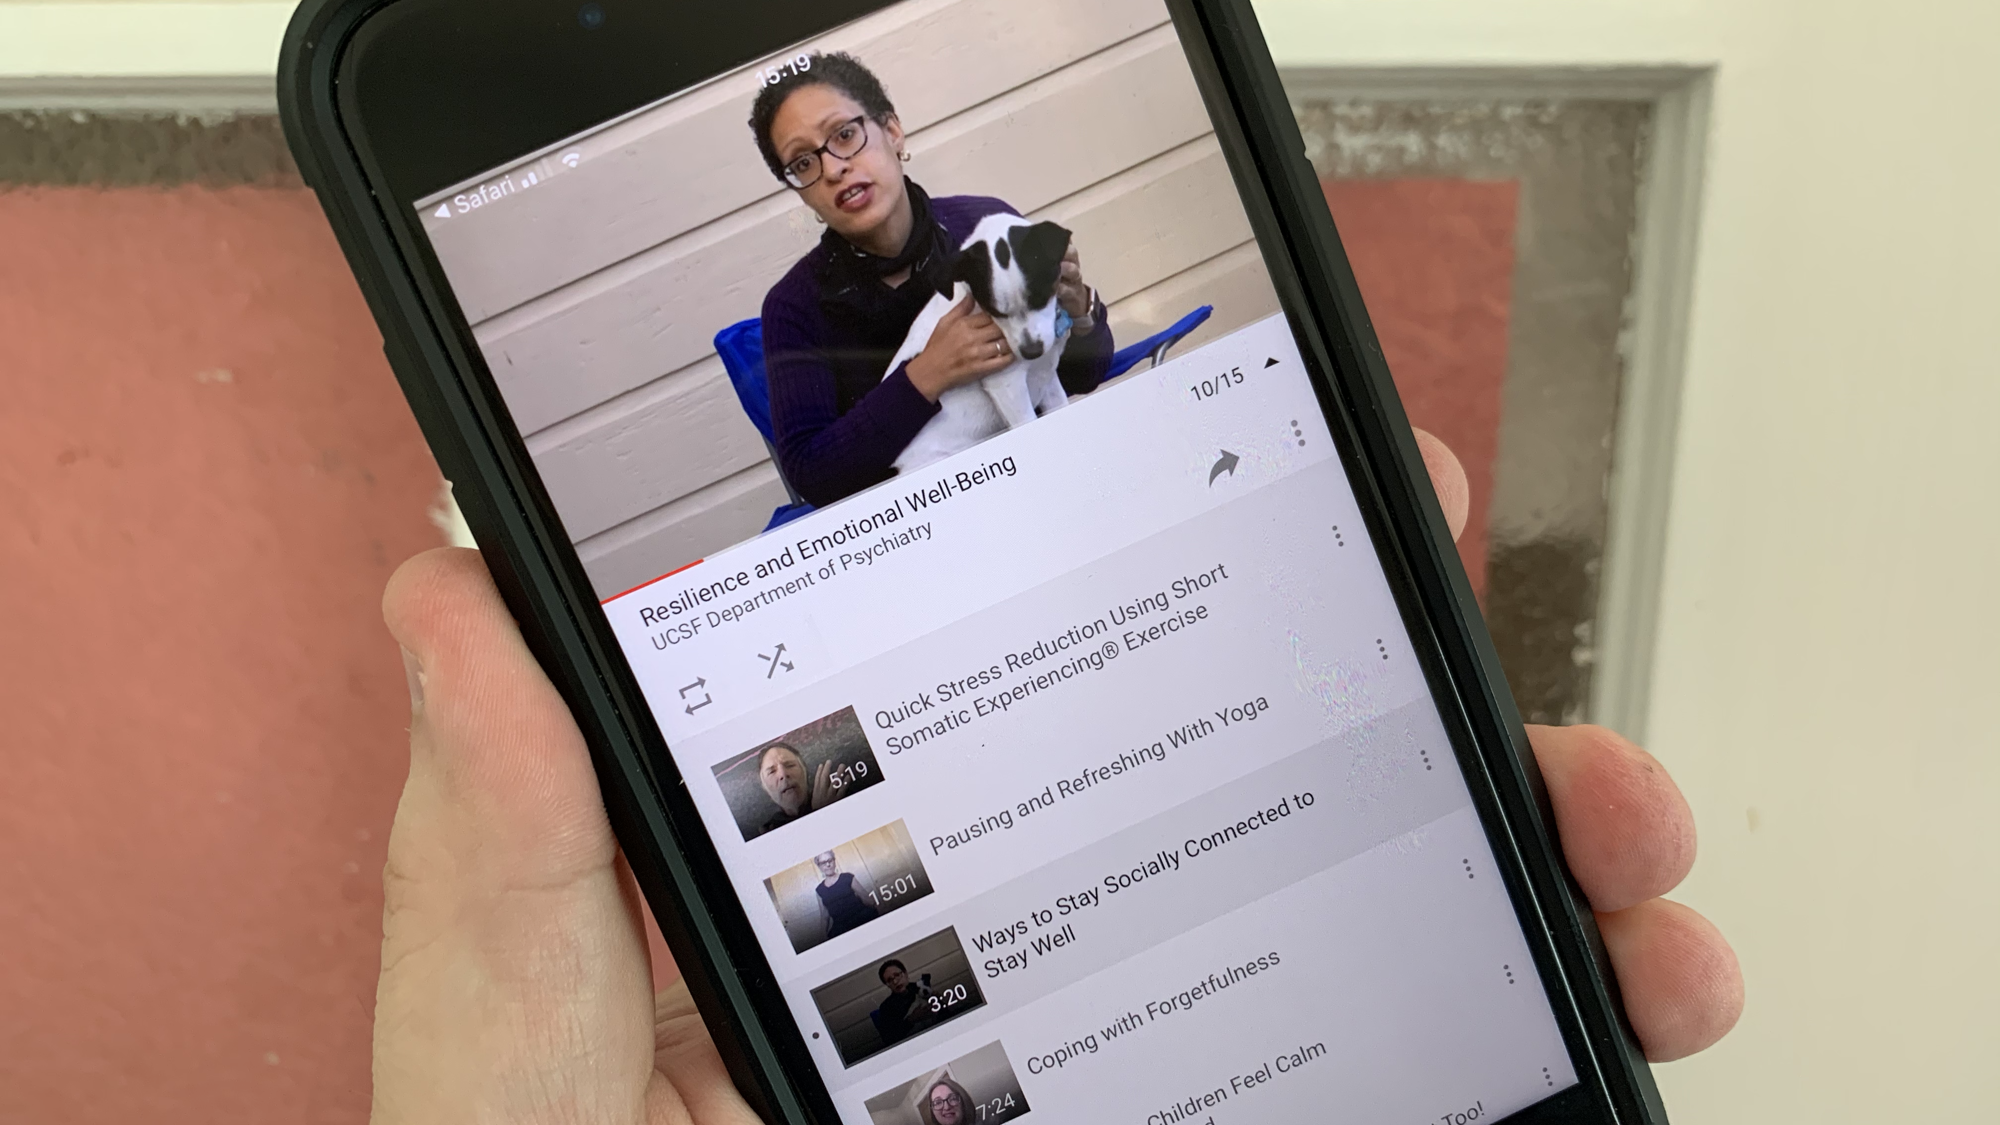 Hand holding an iPhone showing the video series on YouTube